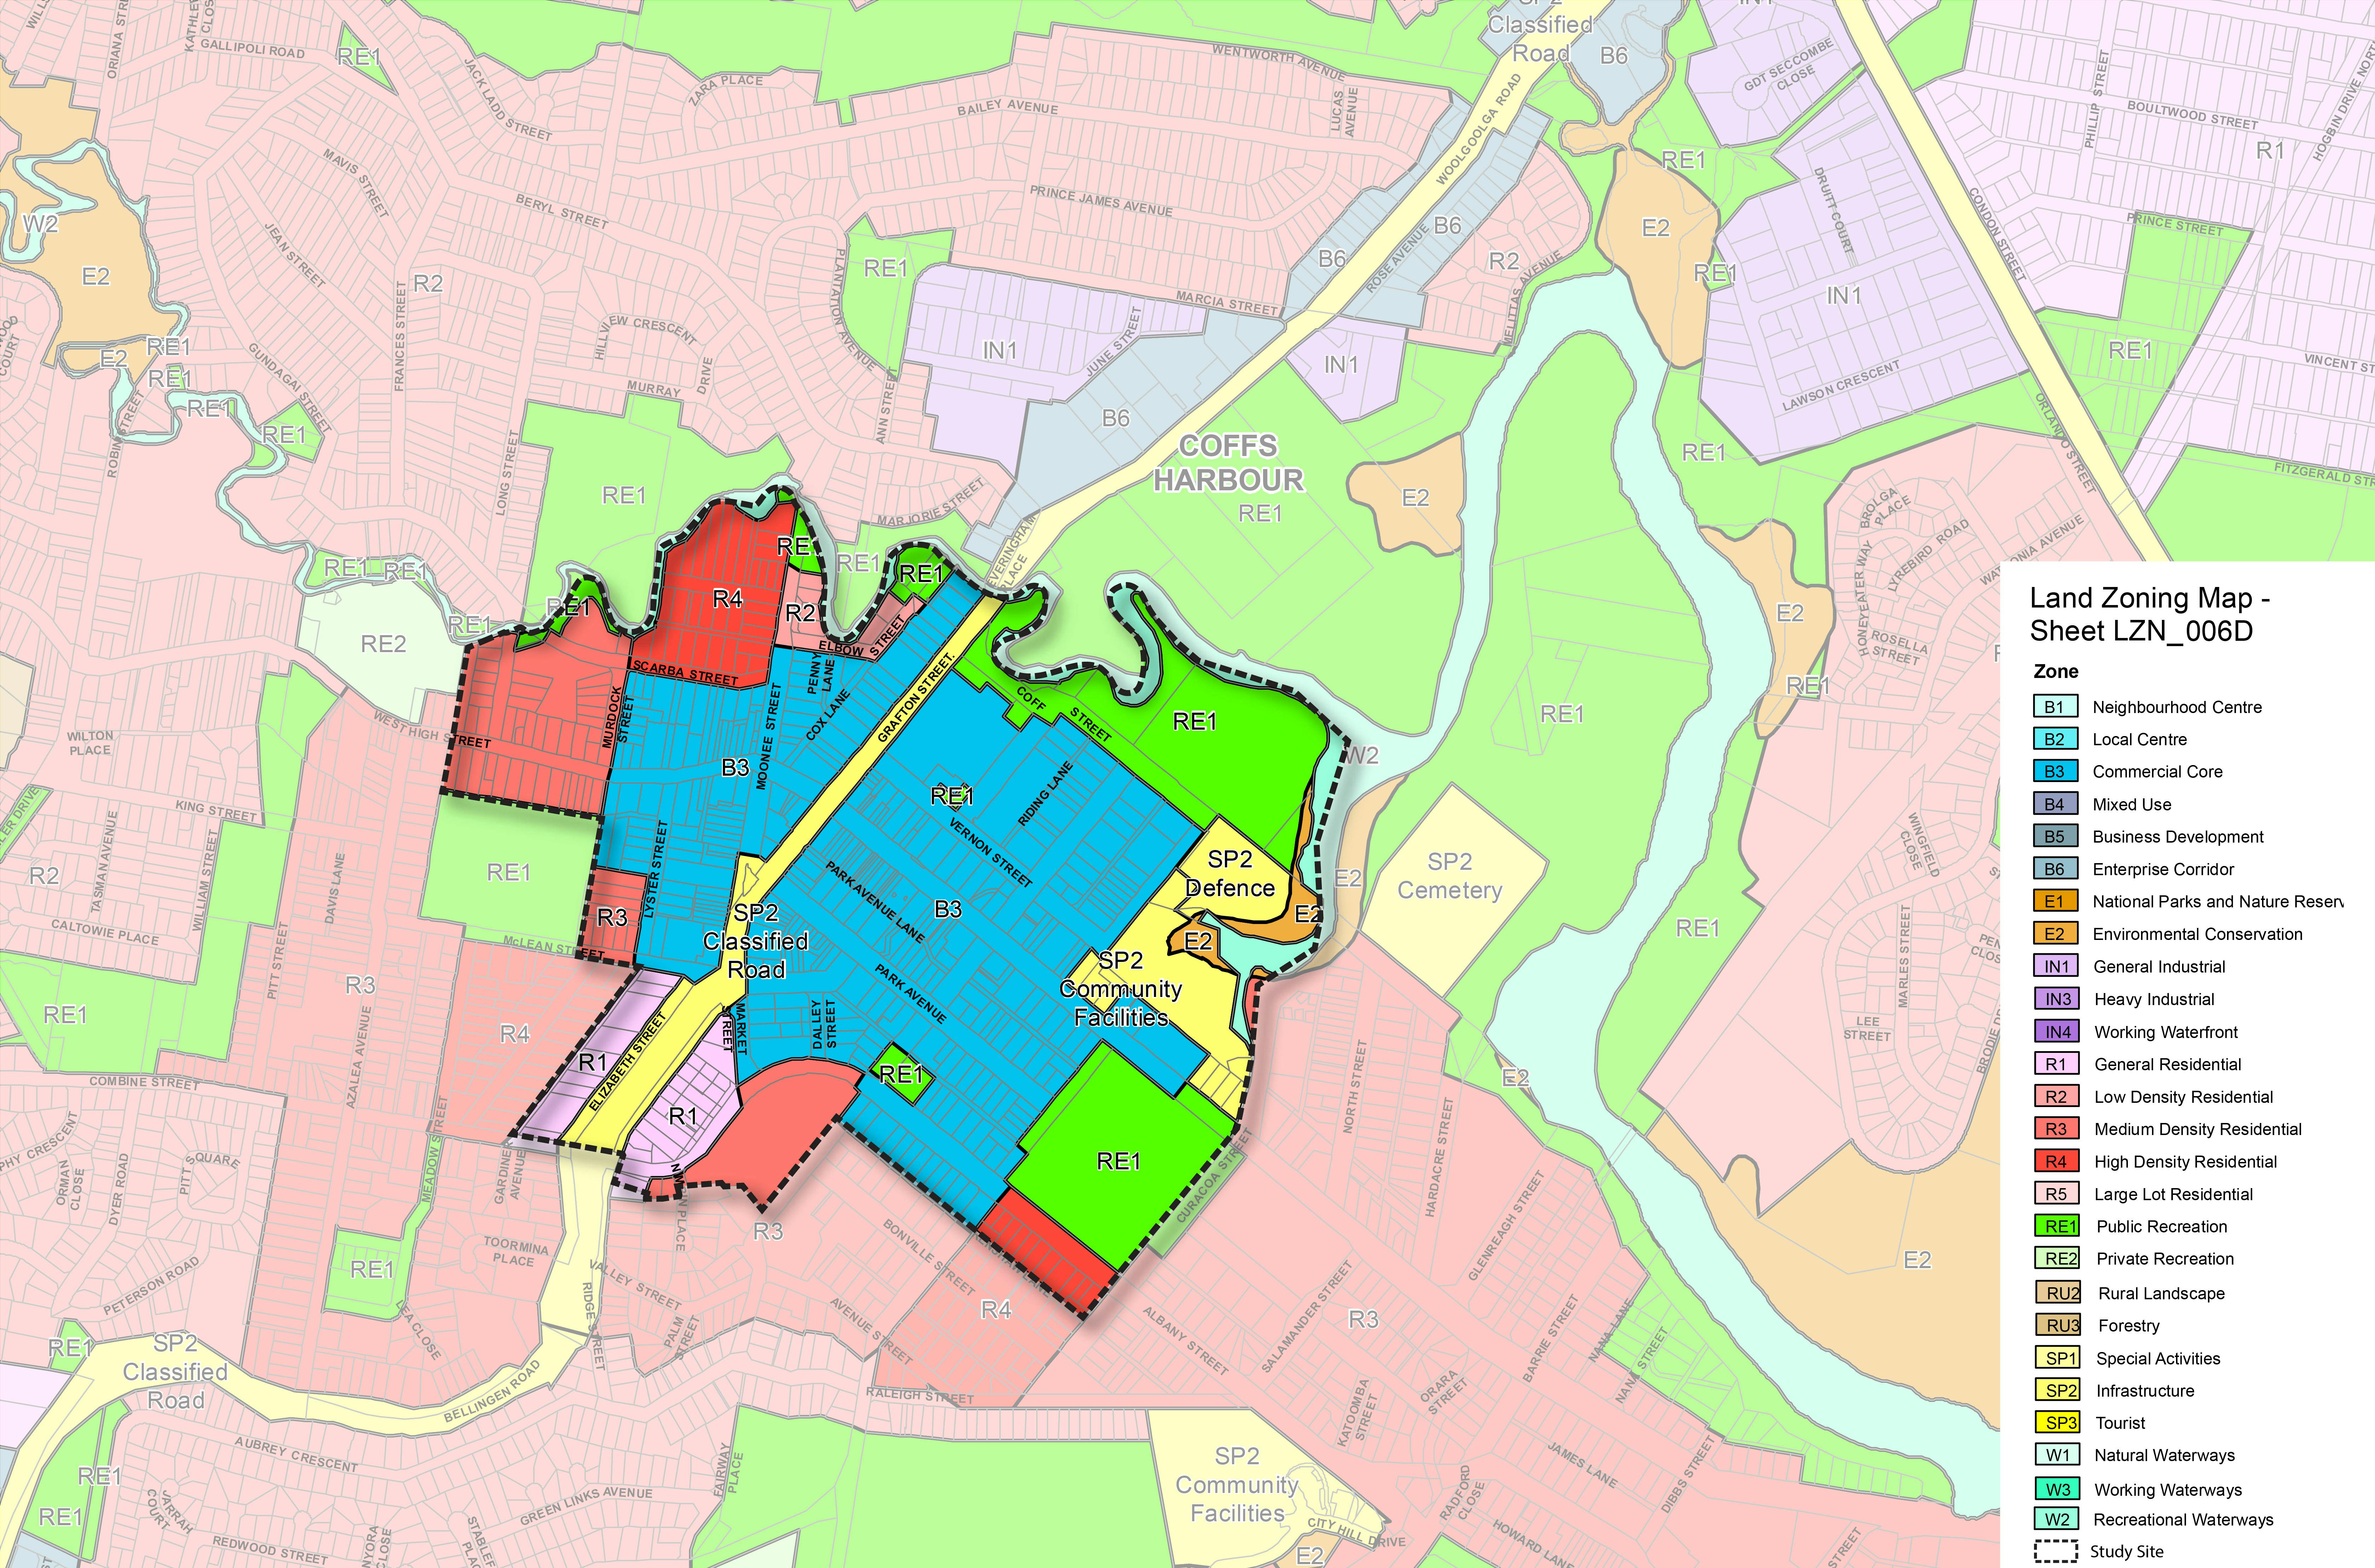 Map of Land use Zones of the CBD